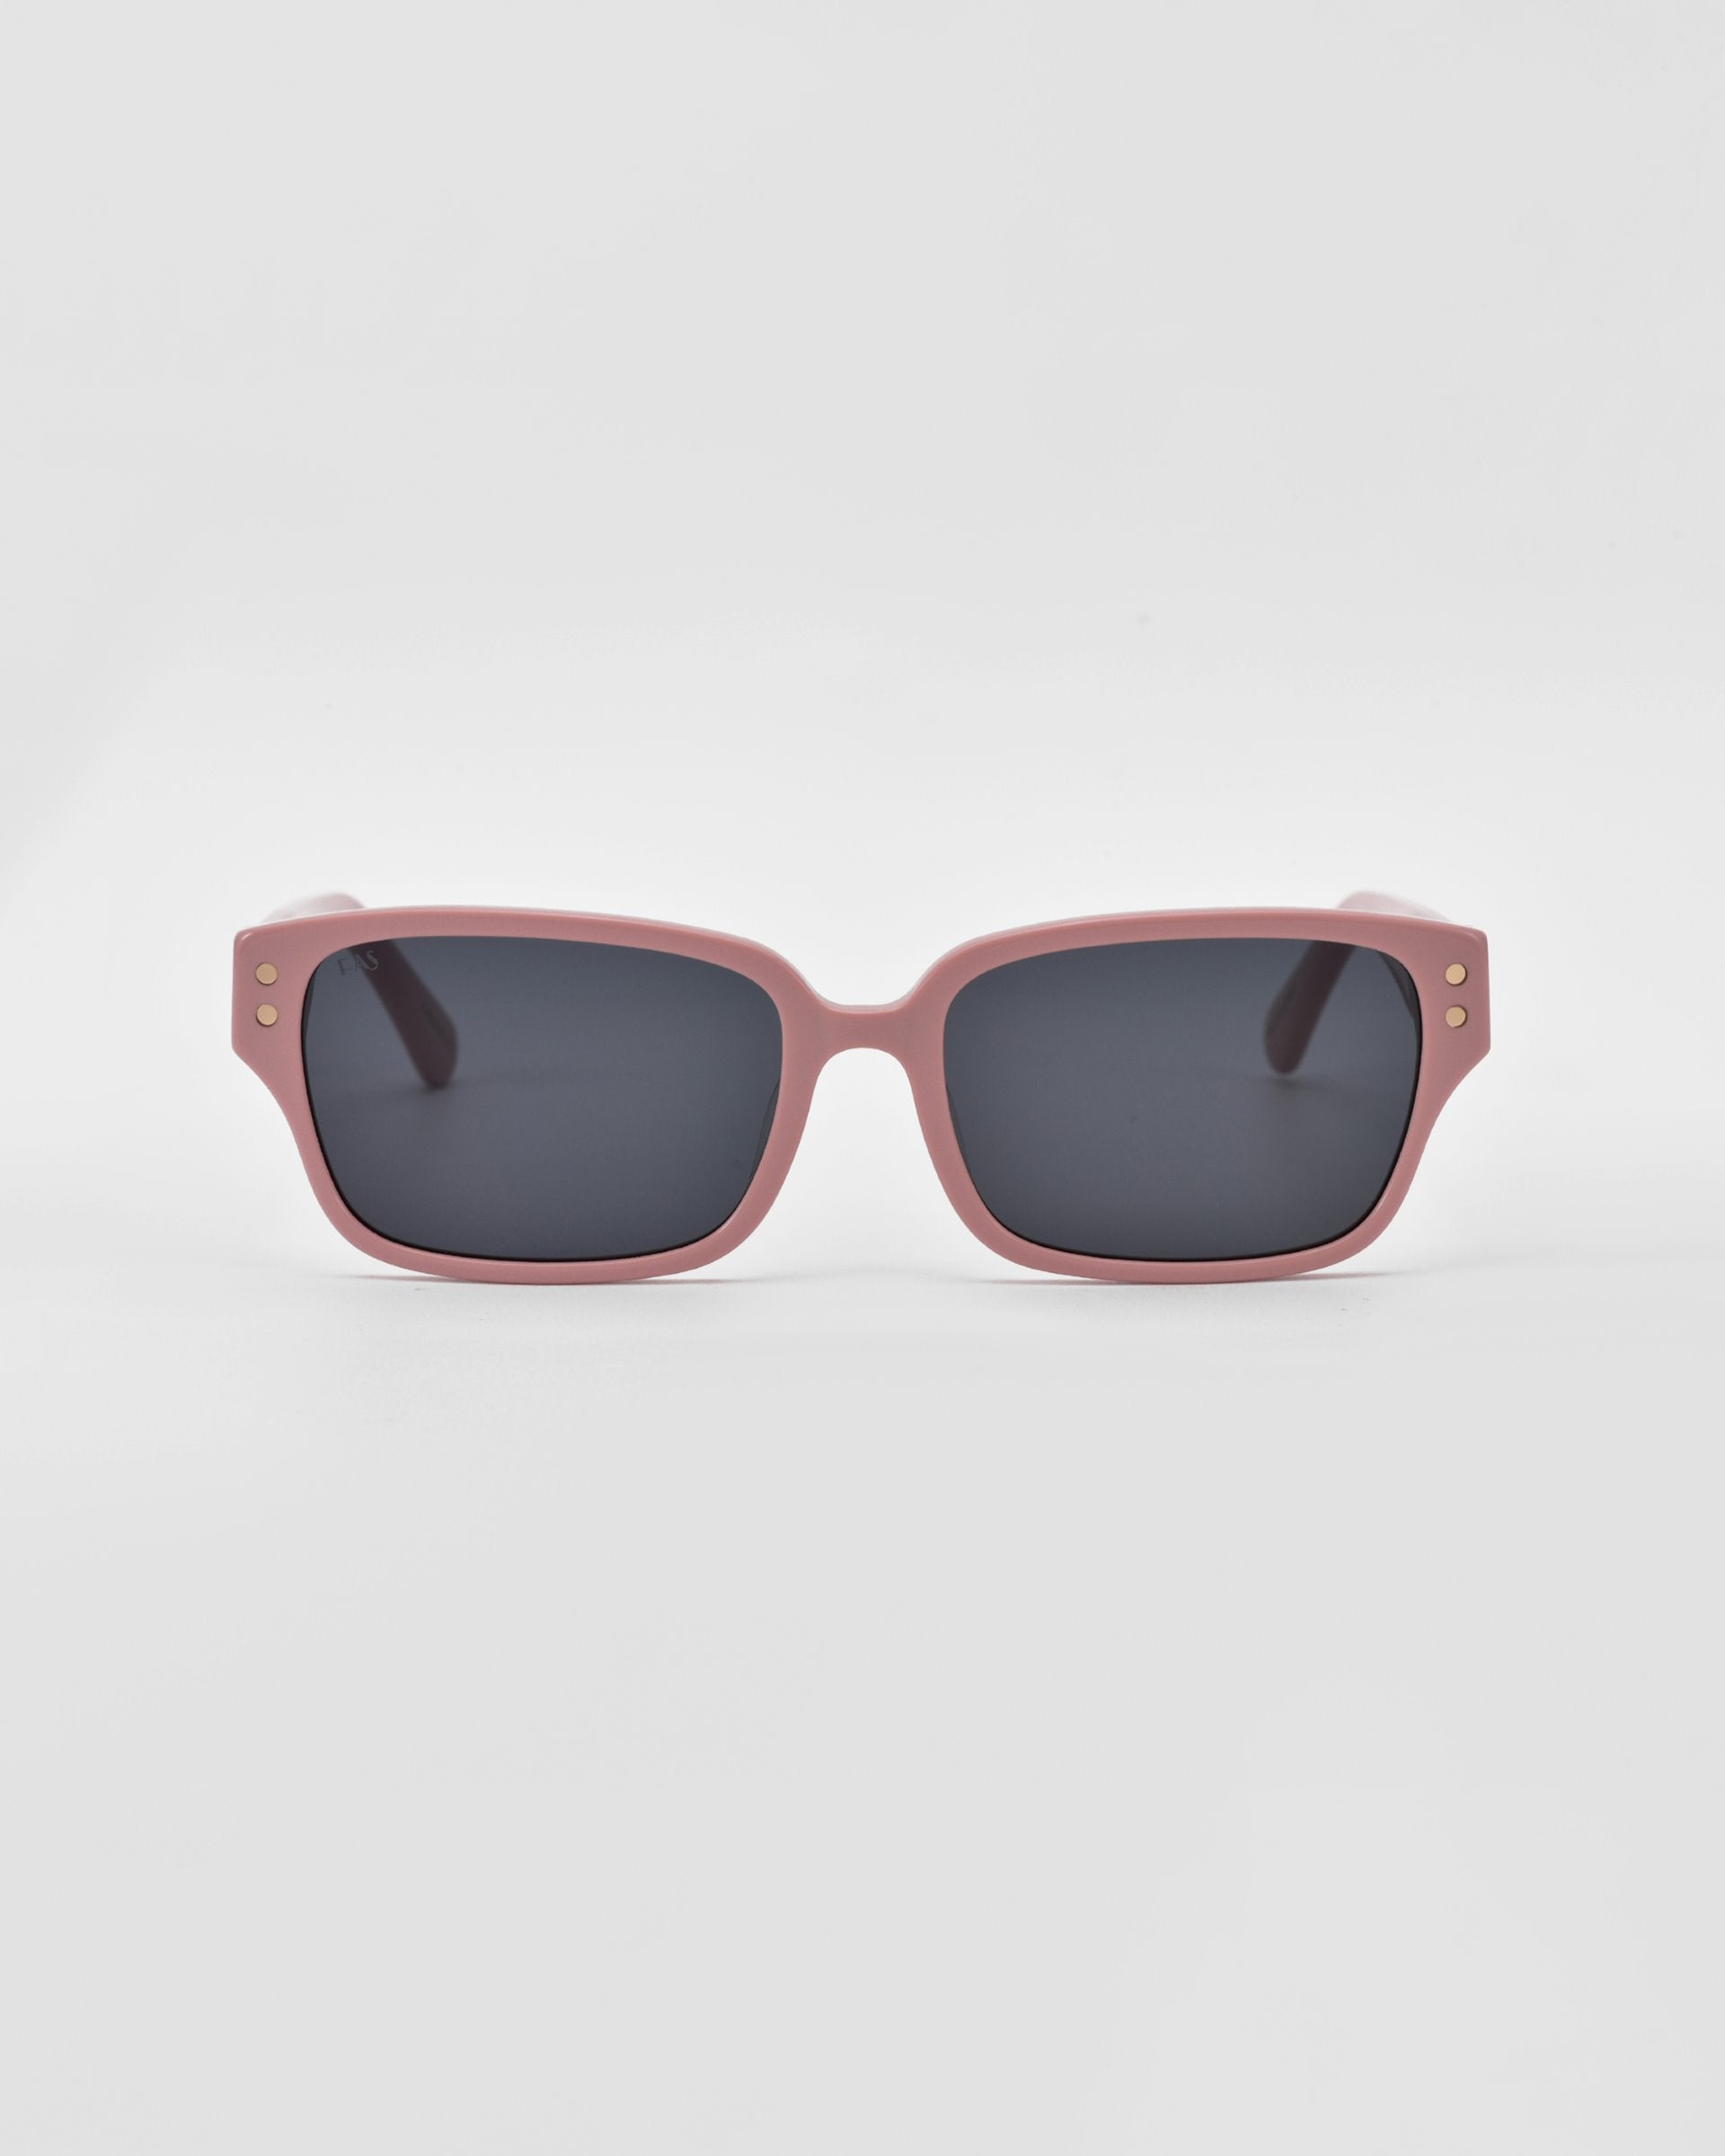 These For Art's Sake® Zenith sunglasses feature light pink square frames with chunky chain detailing and dark lenses. The corners of the handcrafted acetate frames have two small circular metal accents near the temples. The background is plain white.